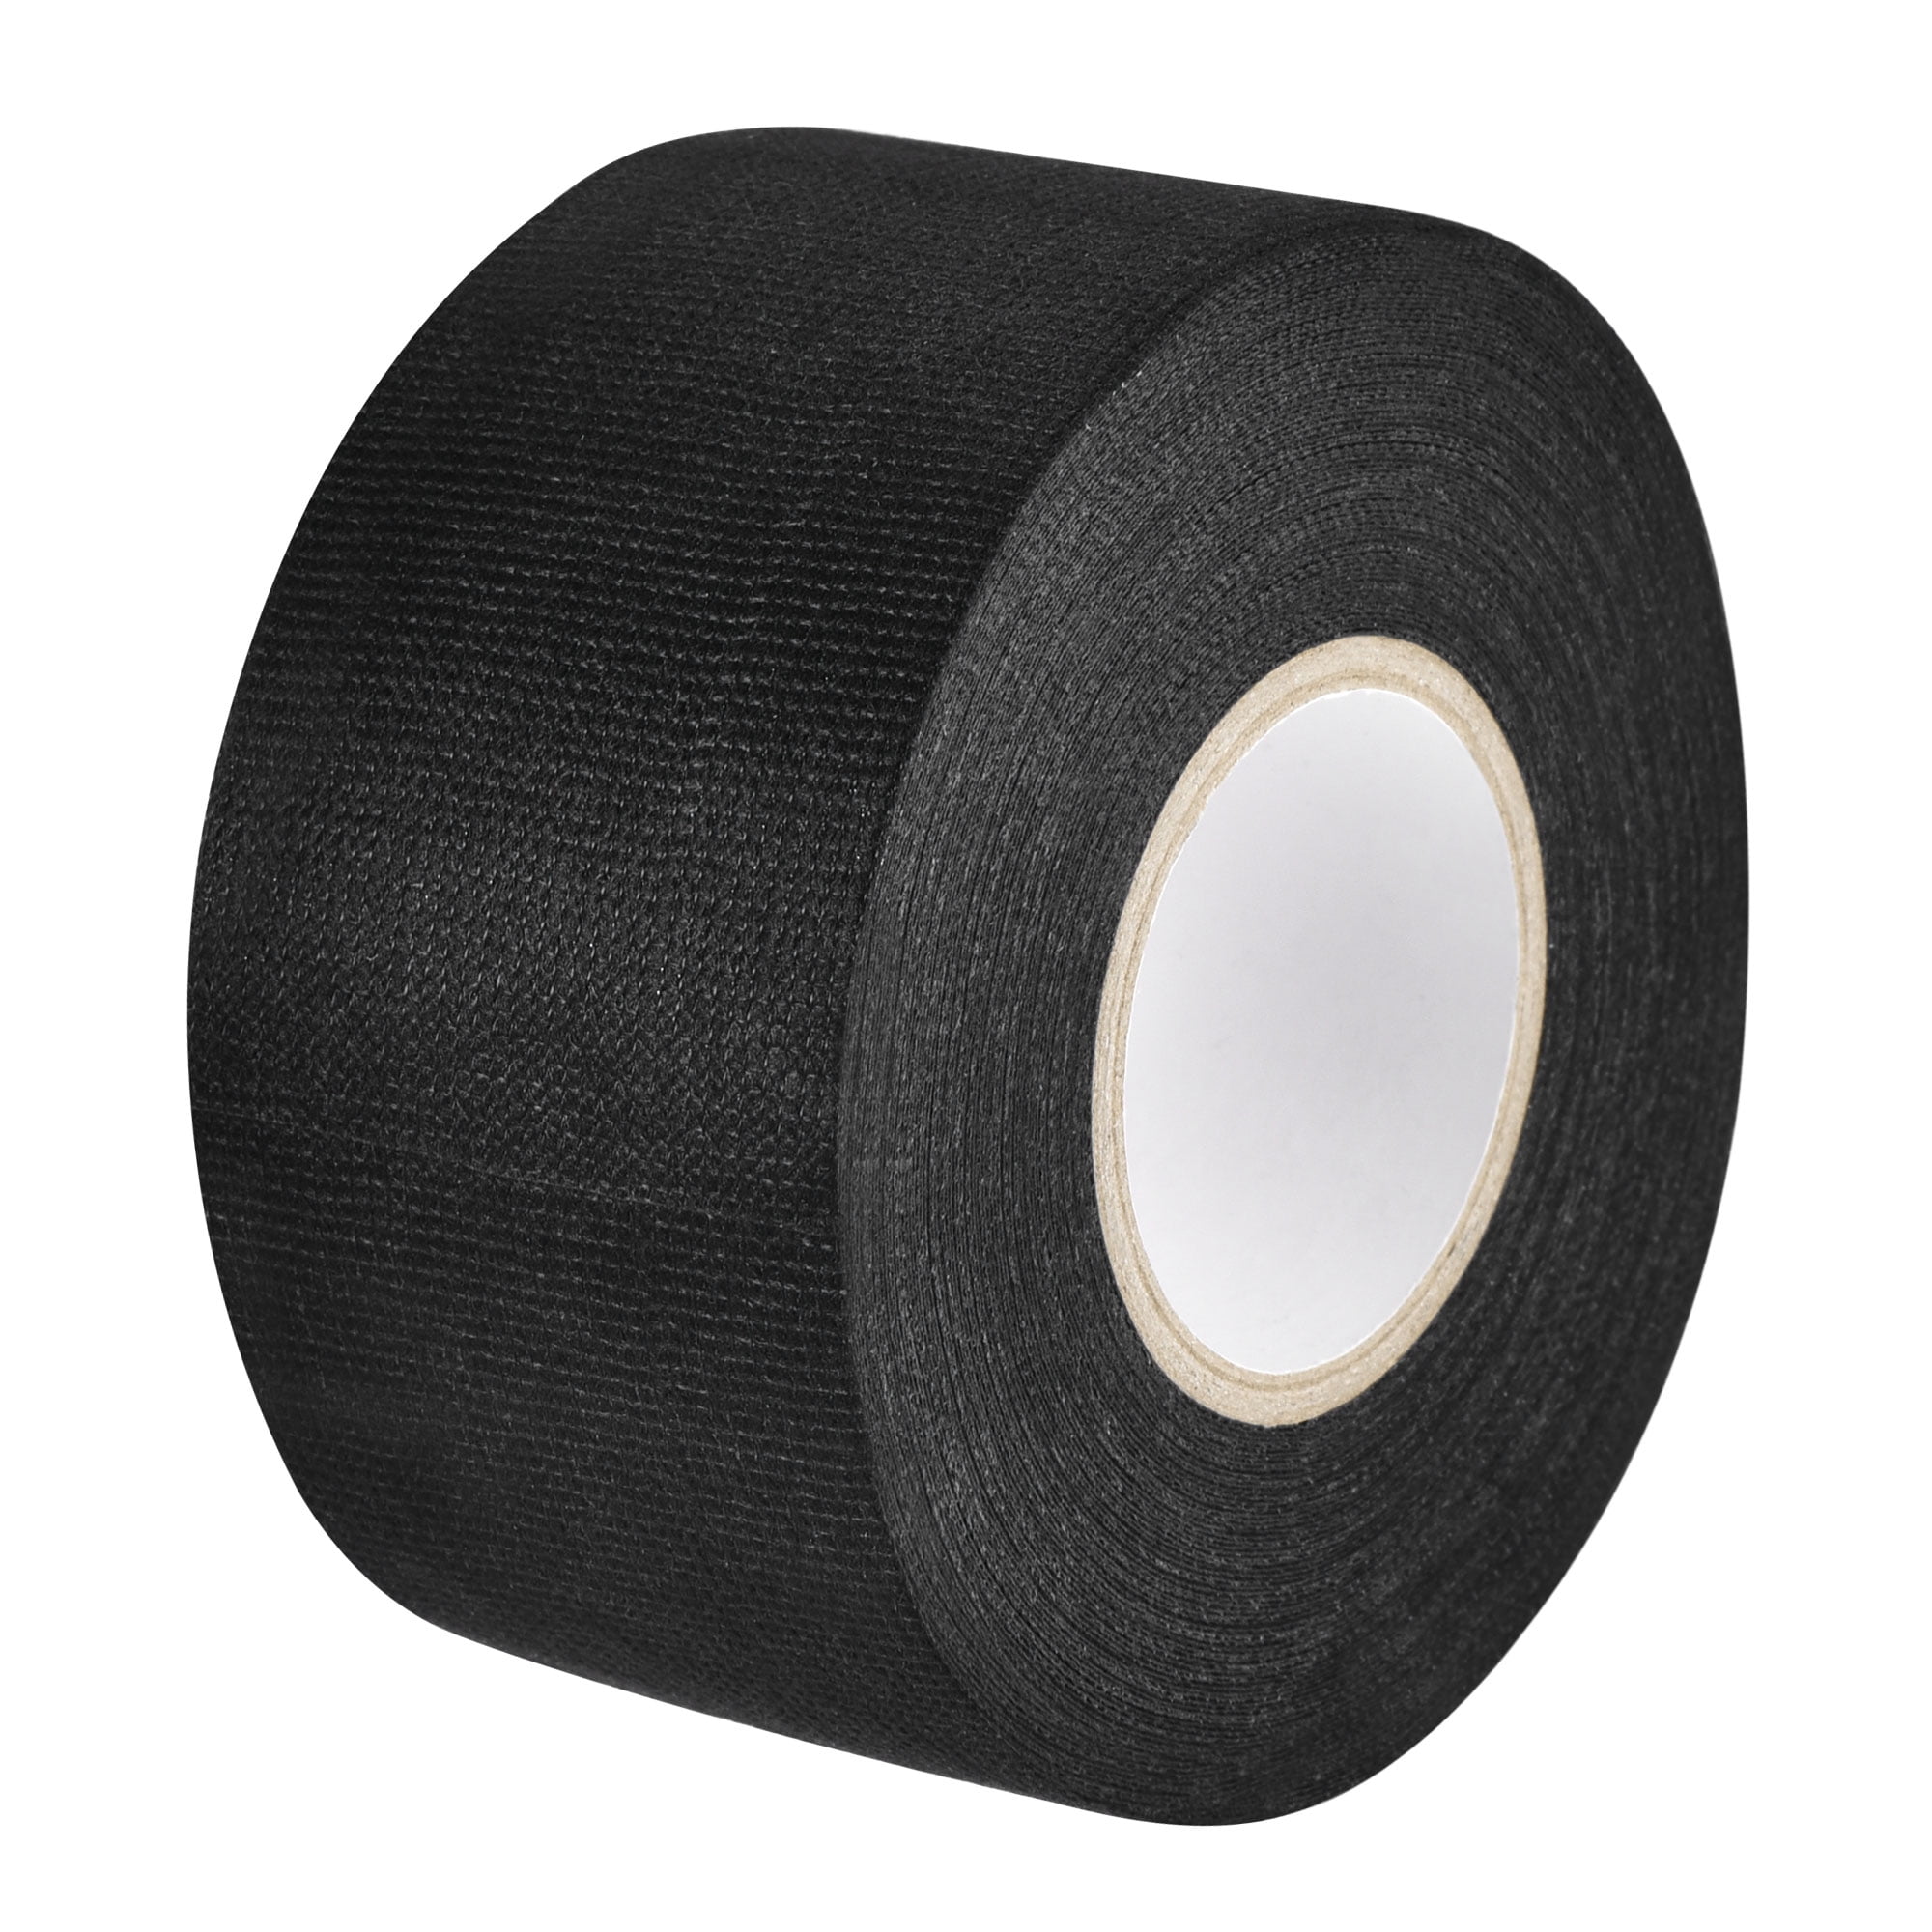 Black 32mm*12m Adhesive Cloth Fabric Tape Cable Looms Wiring Harness X 